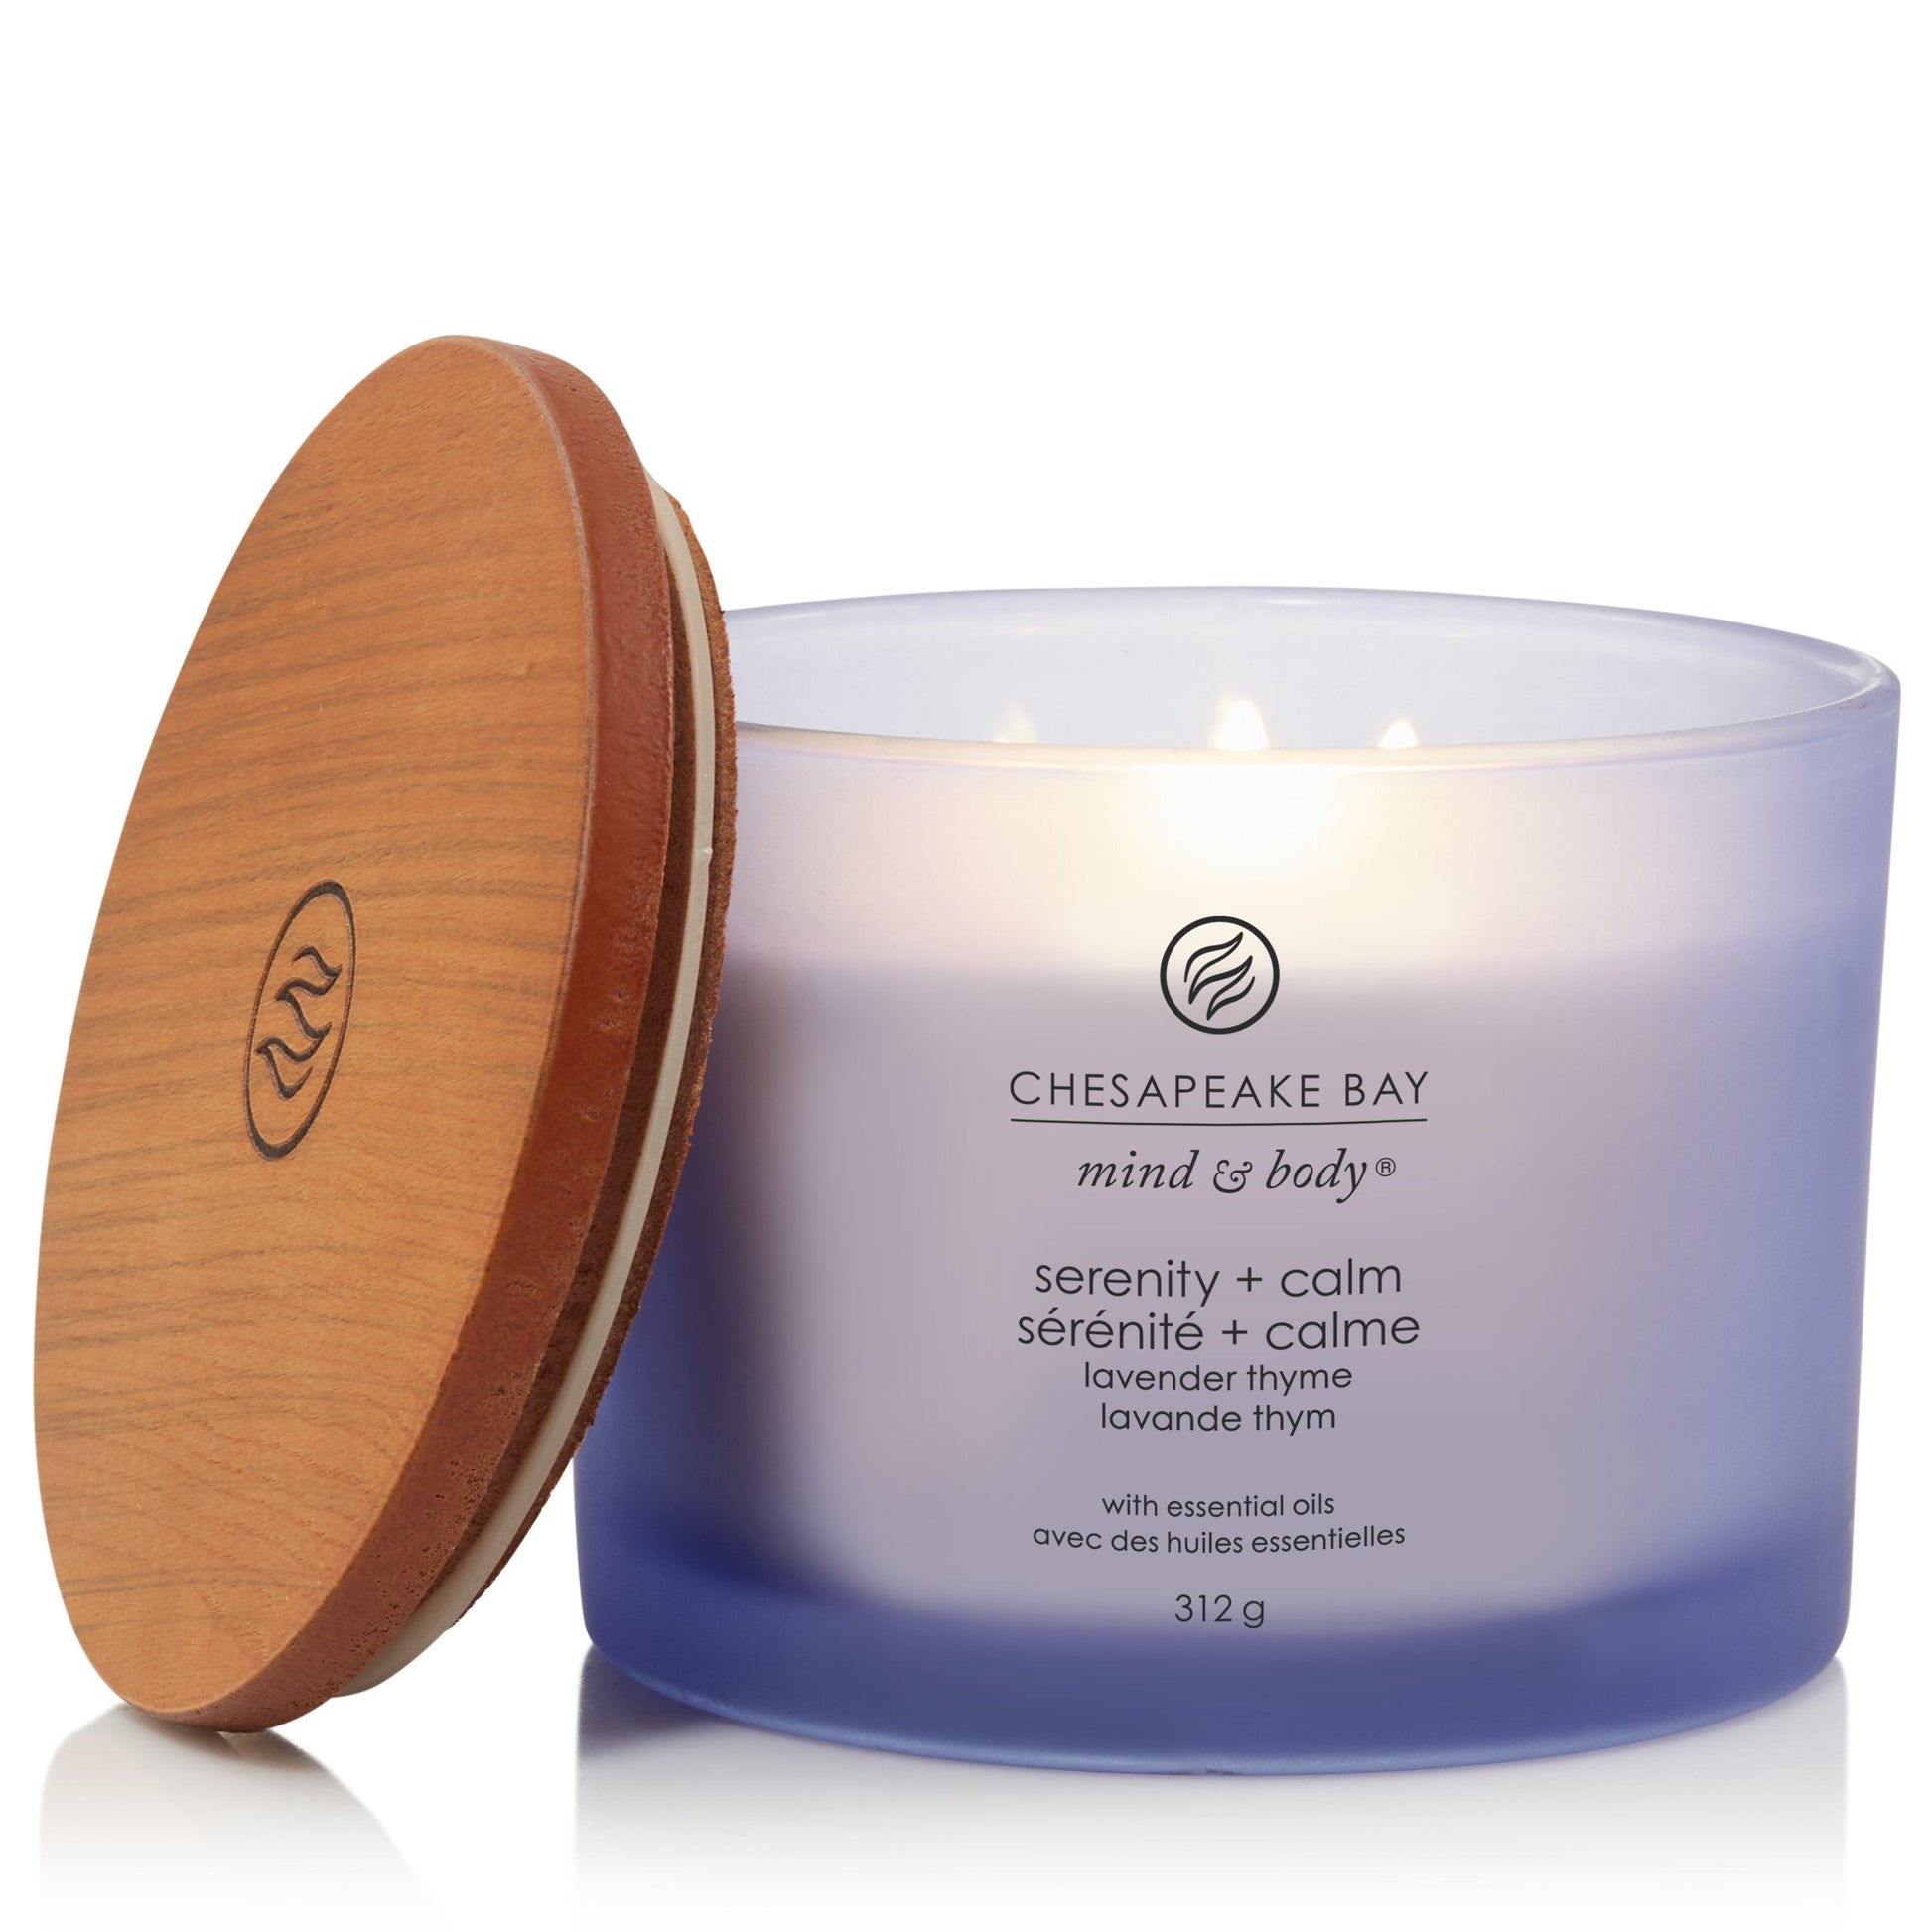 Chesapeake Bay Lavender Thyme 3-Wick Candle